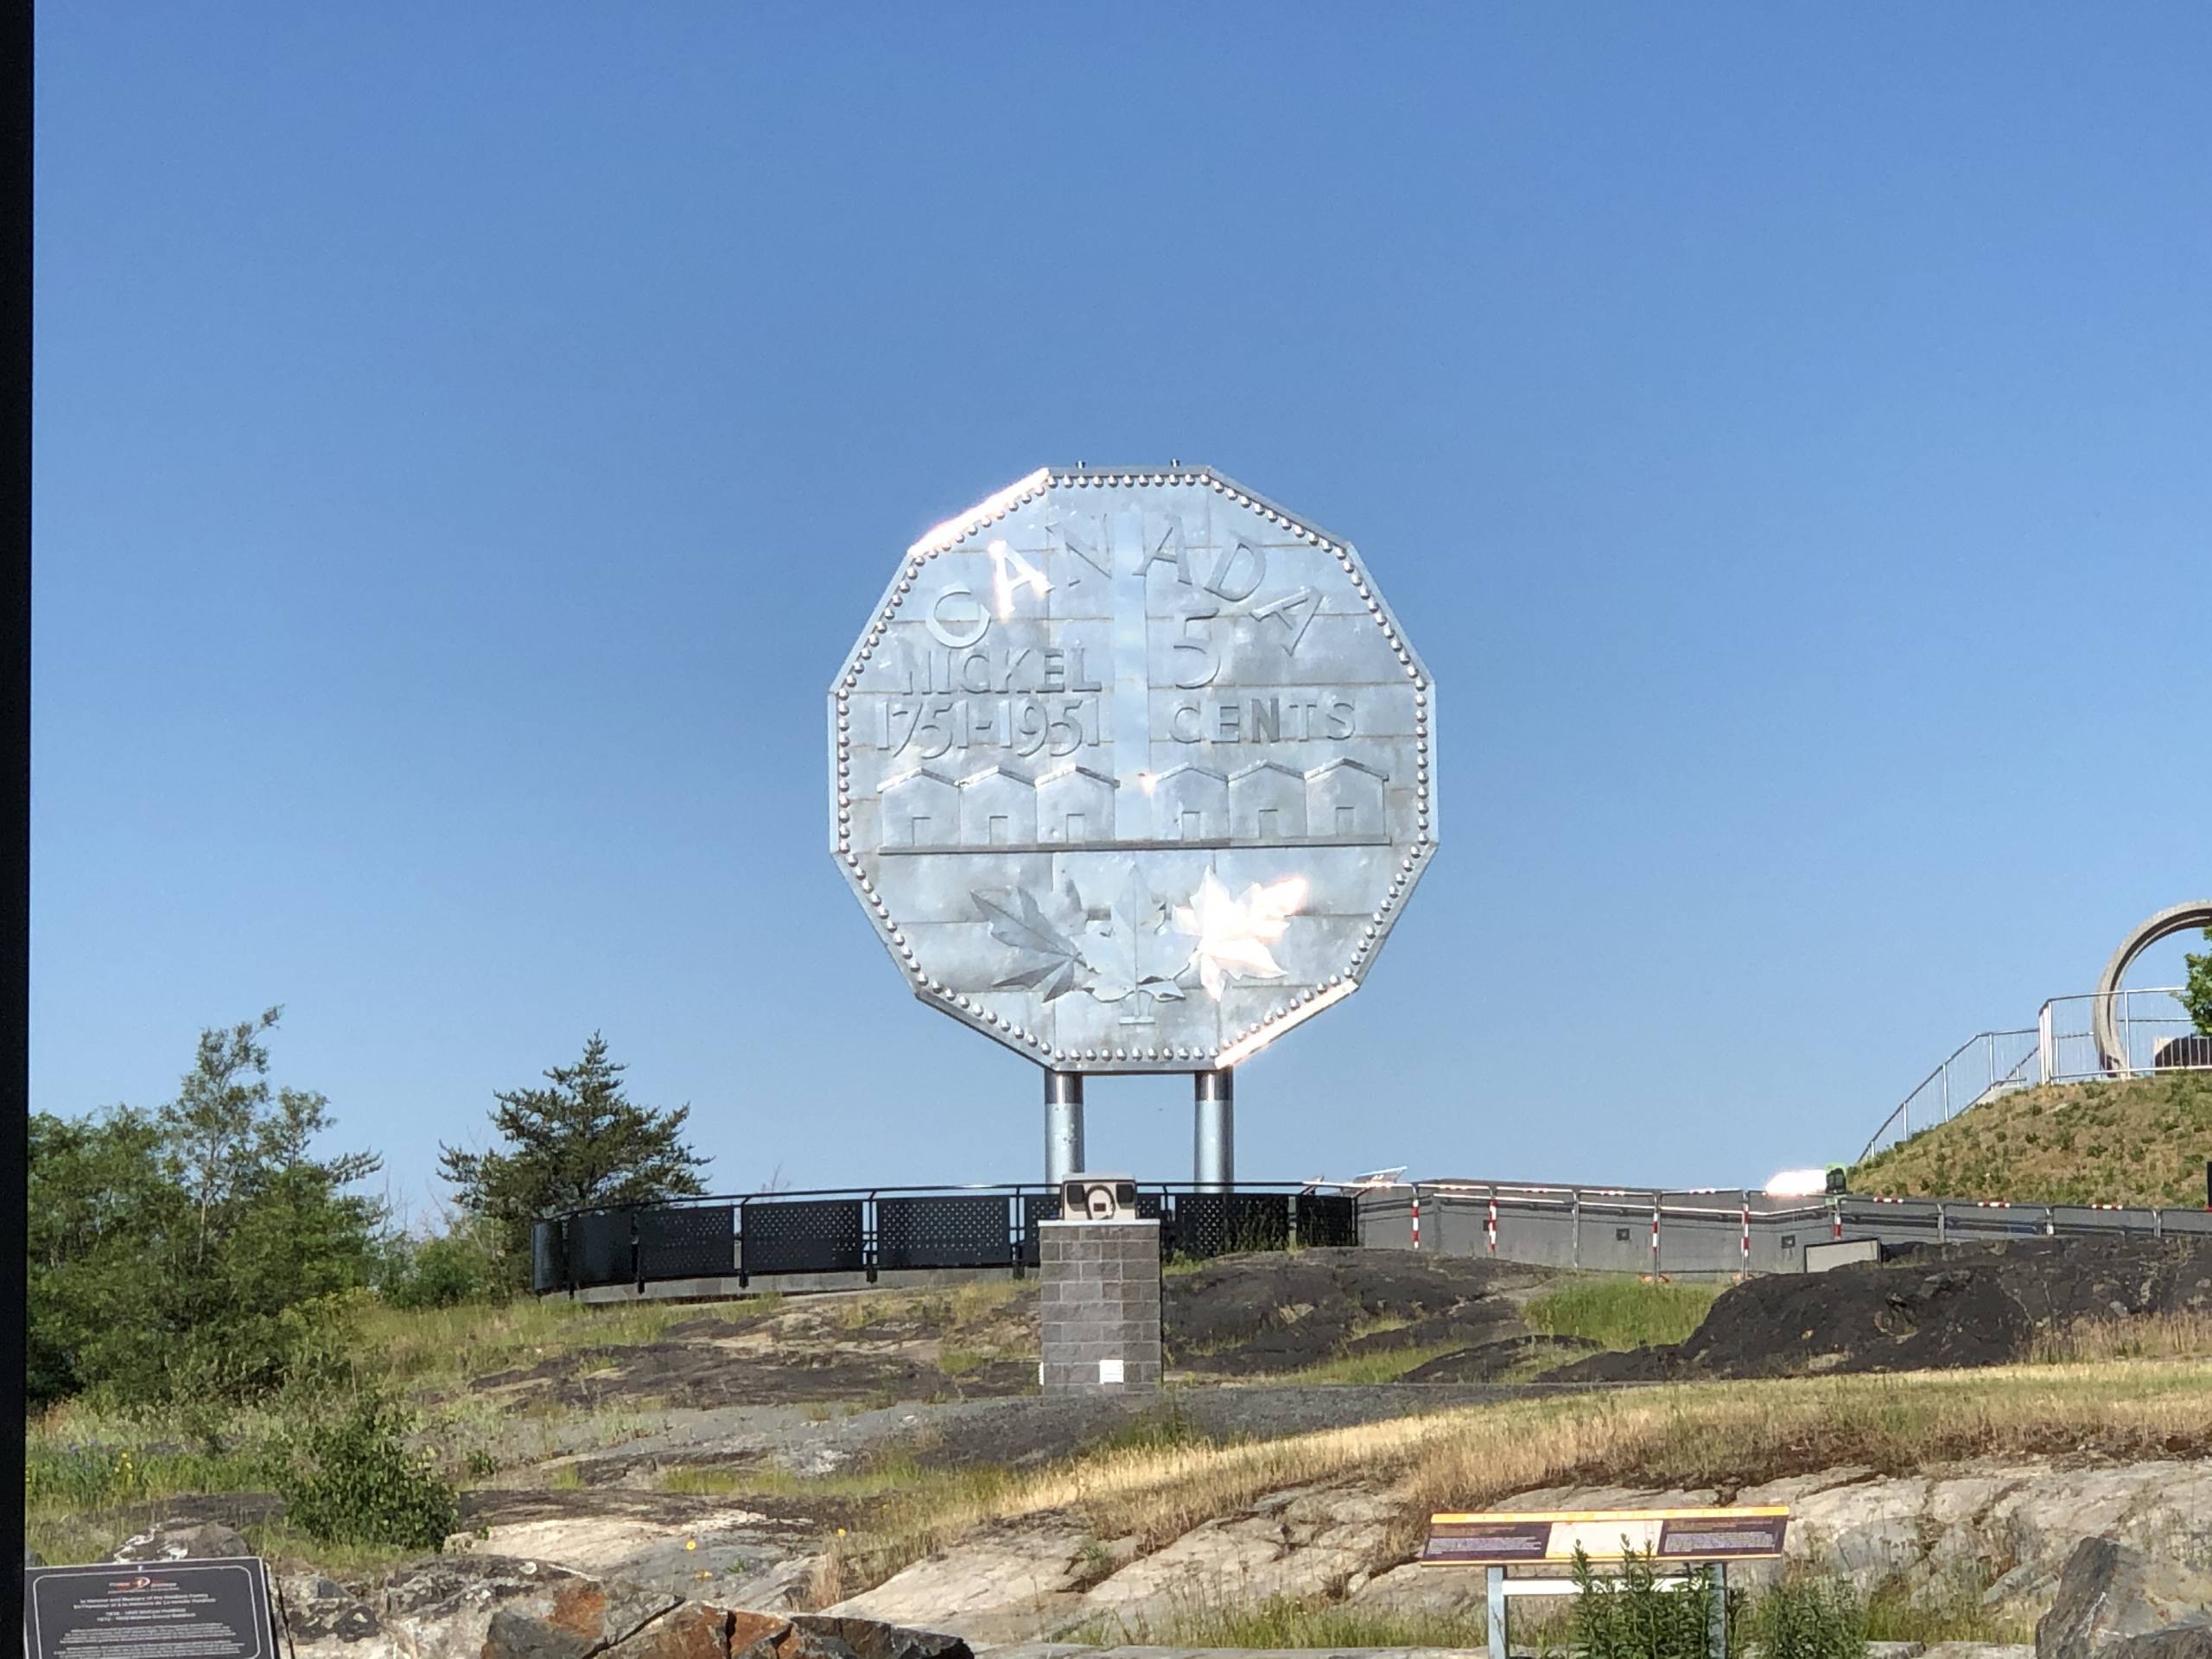 A picture of the famous giant Nickel coin in Sudbury, Ontario